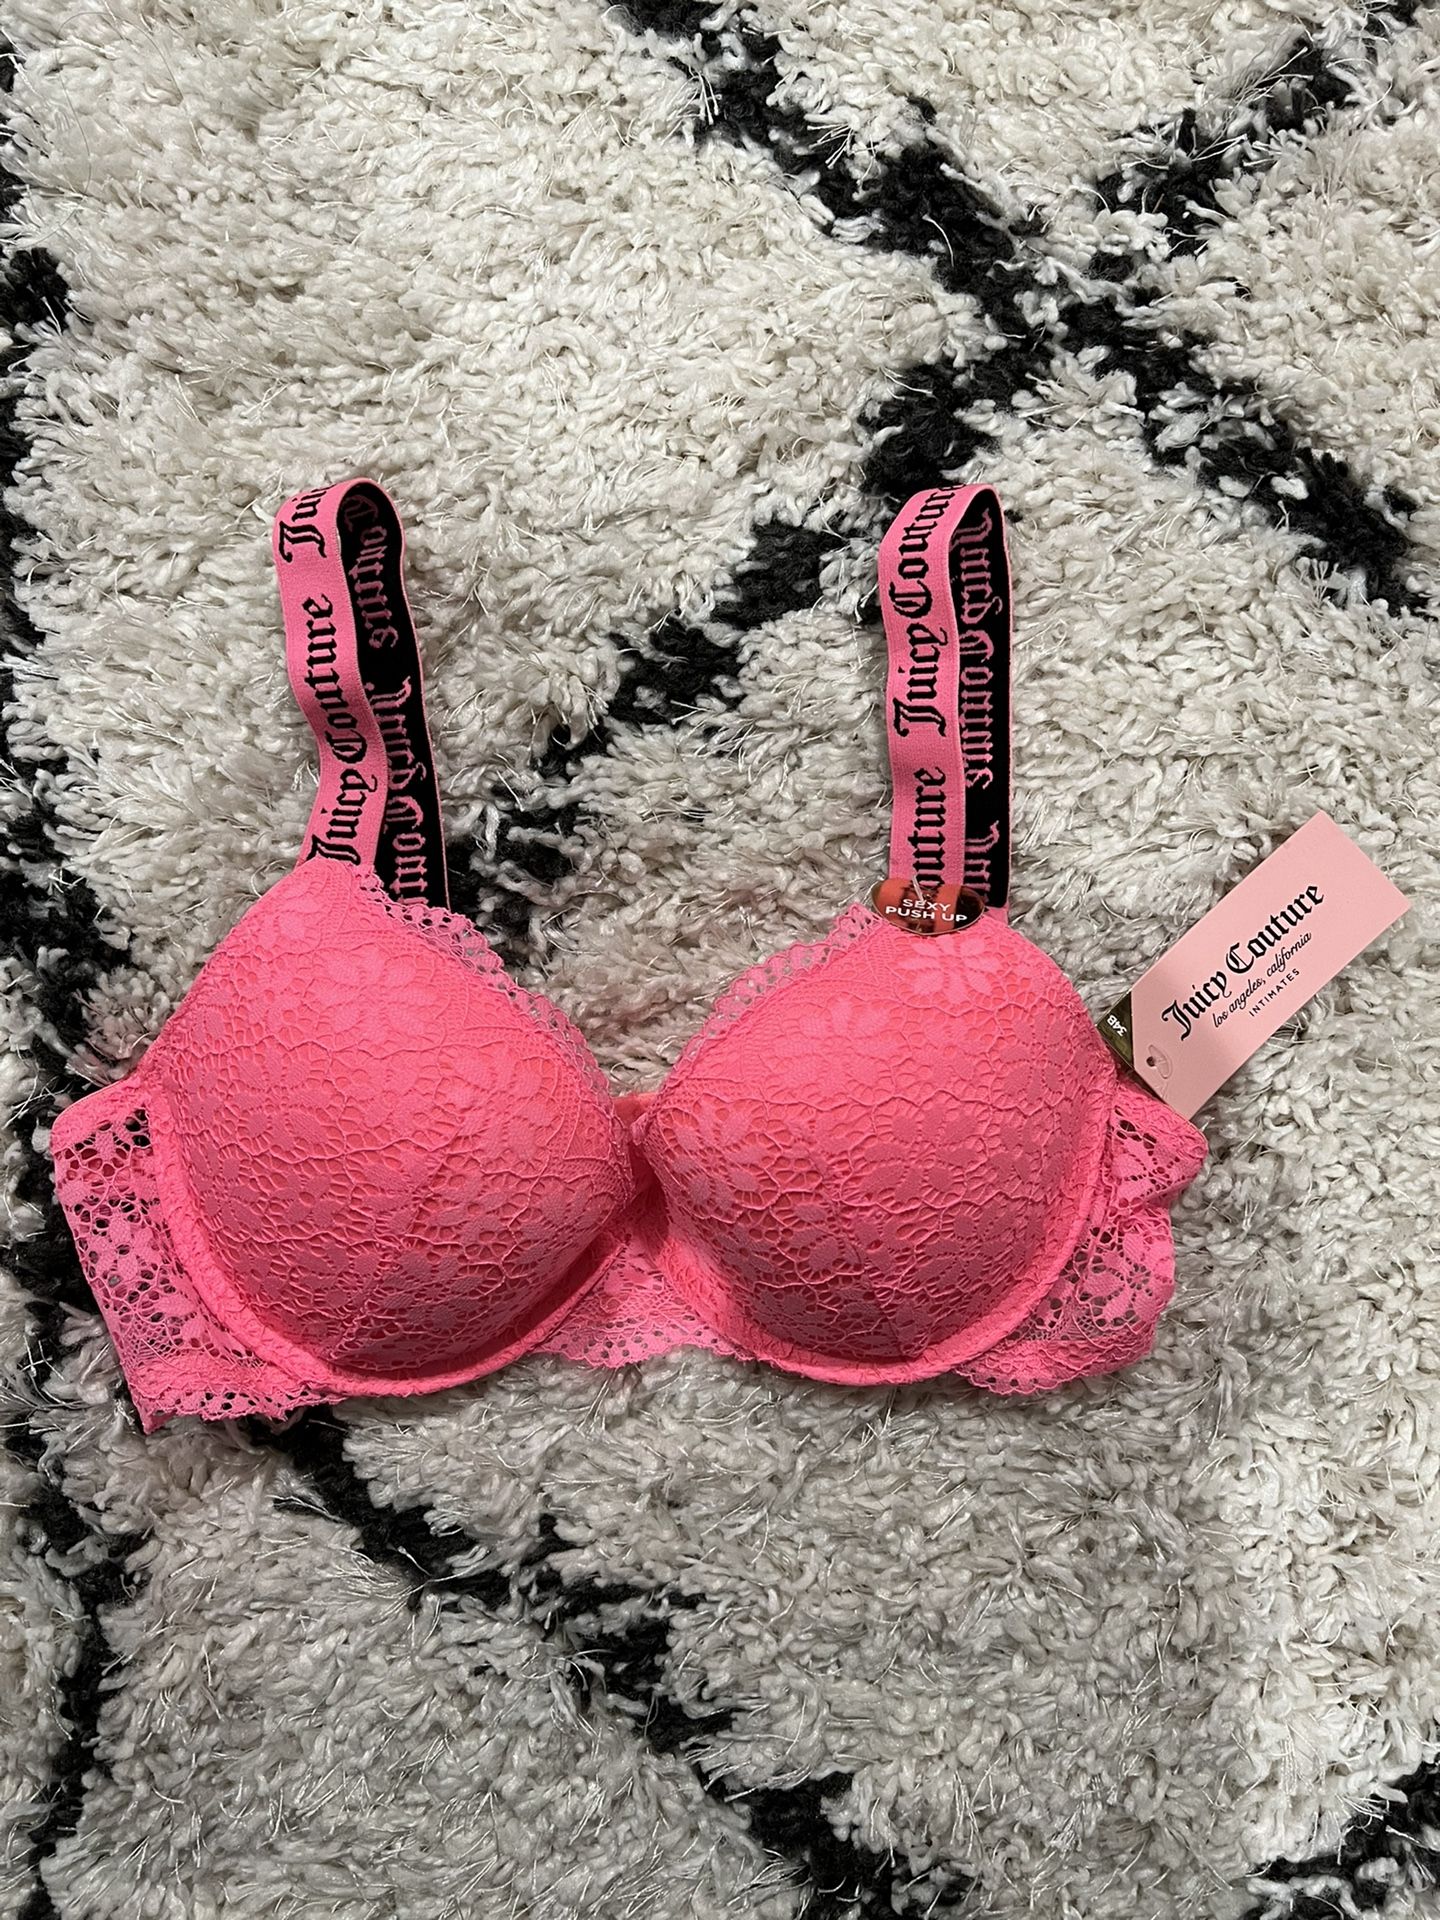 Juicy Couture Hot Pink Lace Bra - Size 42D